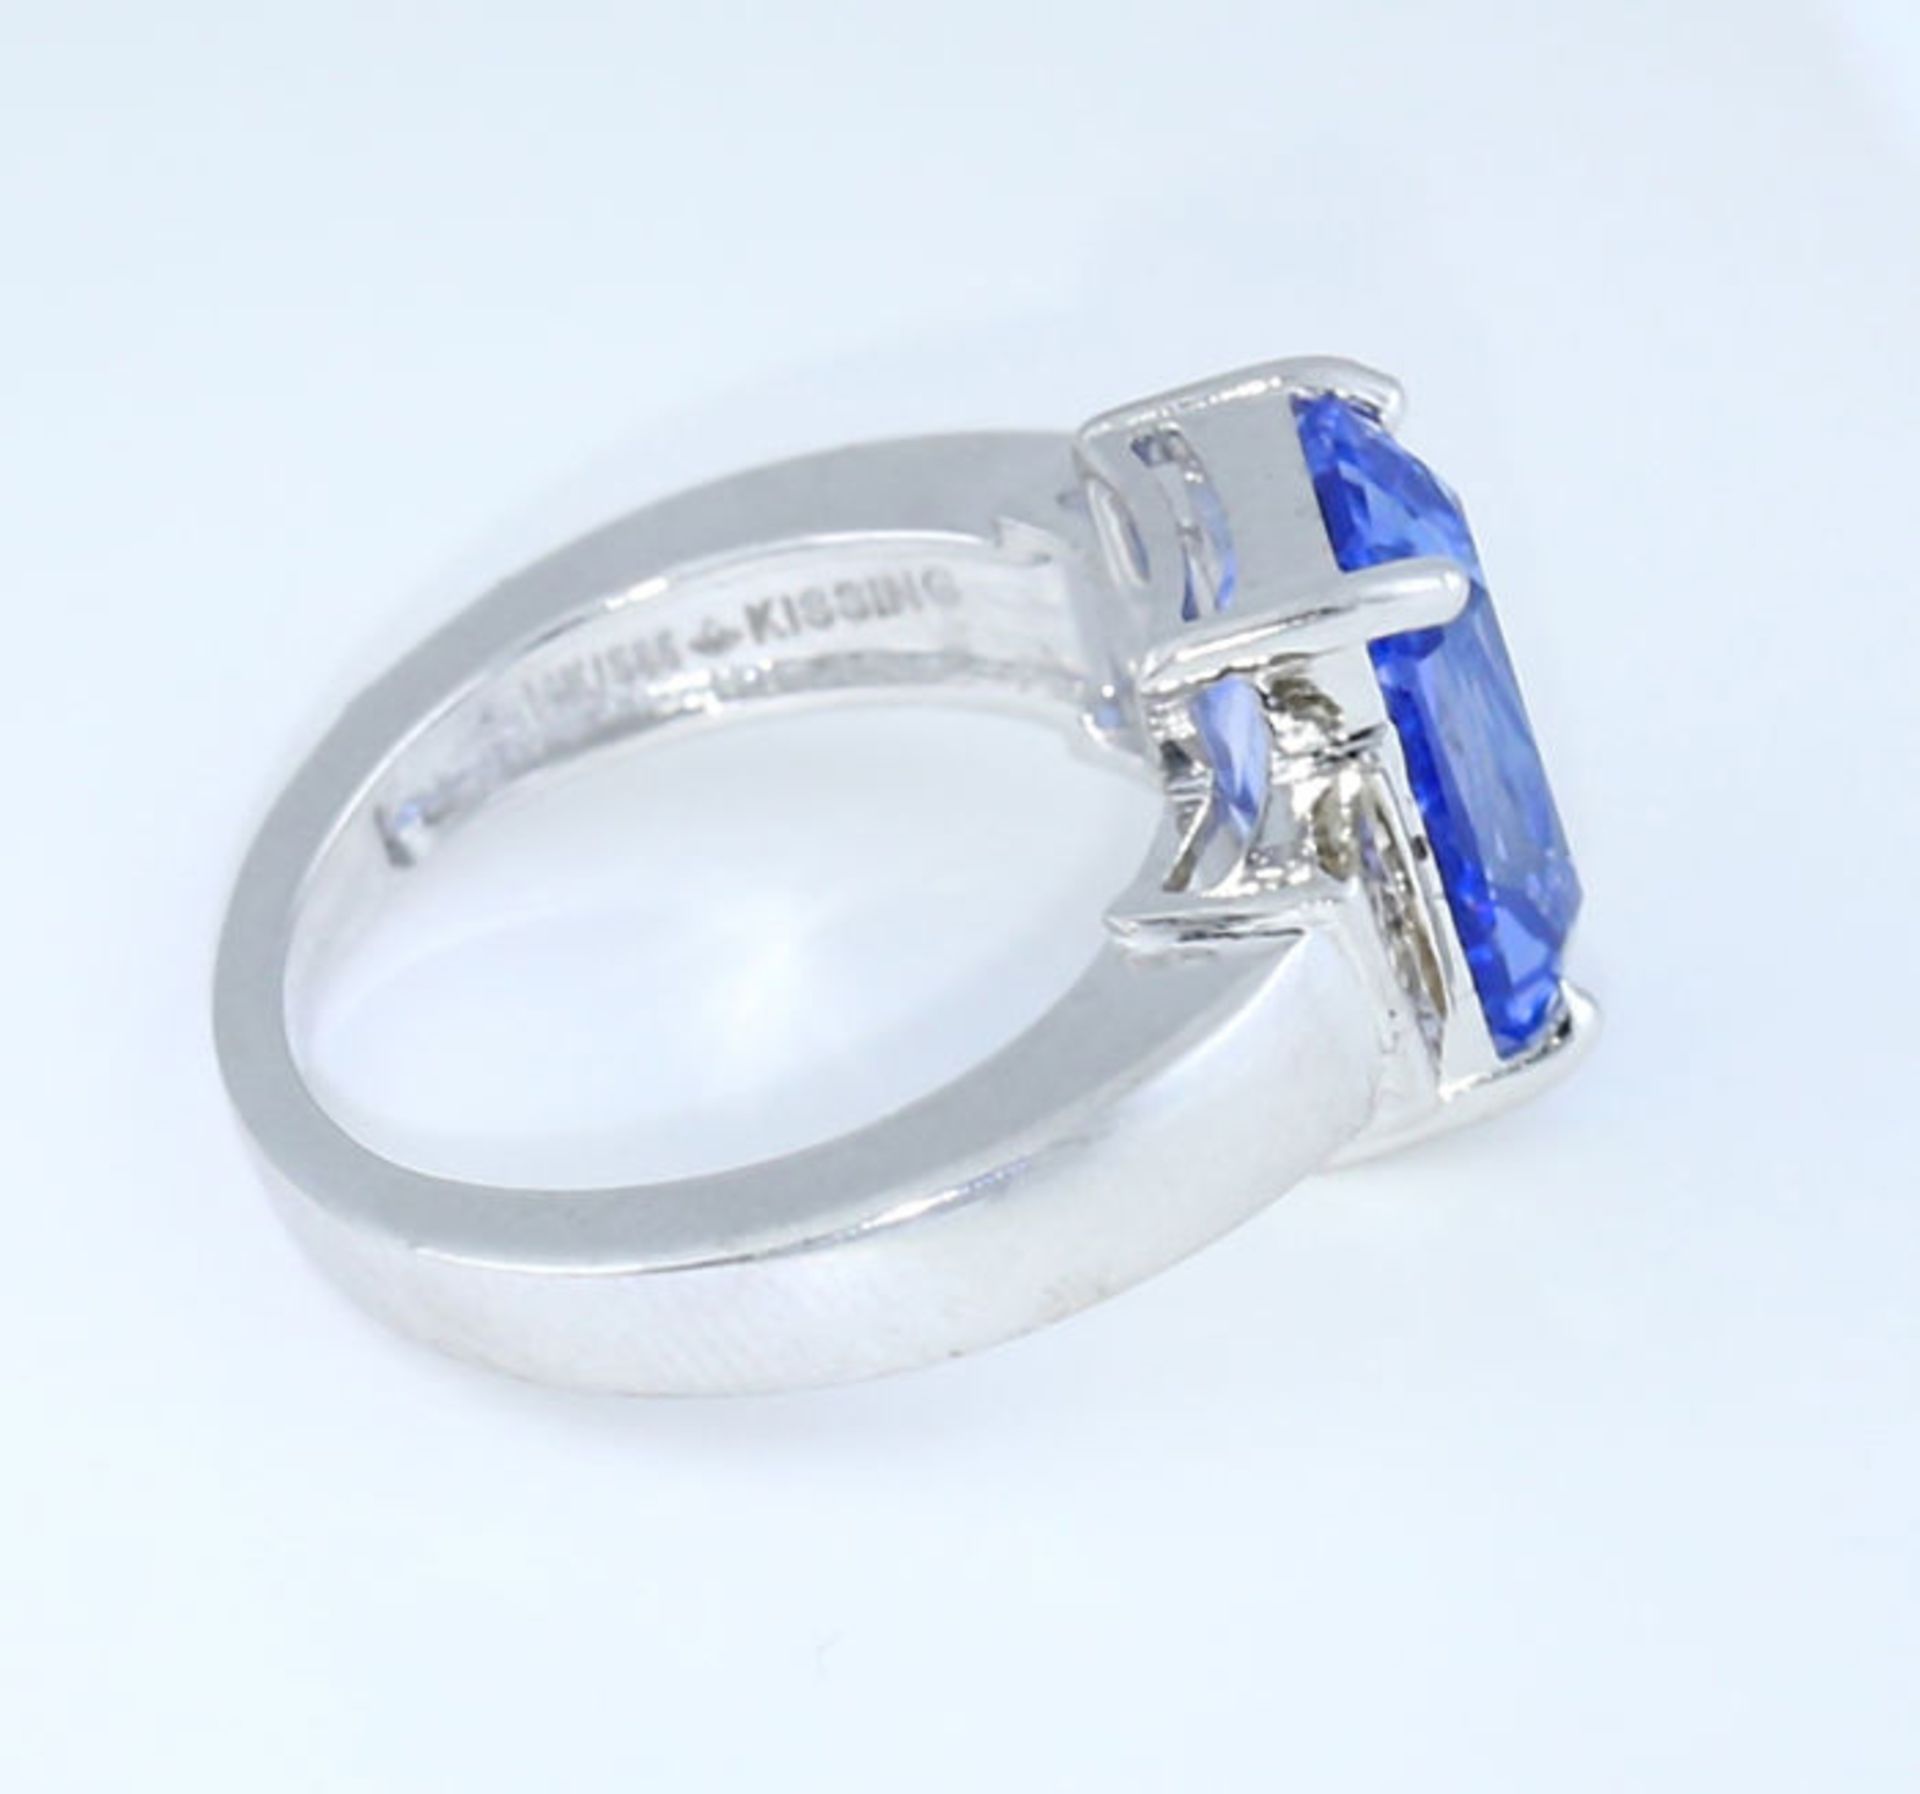 14 K White Gold Blue Sapphire (GIA Certified) and Diamond Ring - Image 8 of 10